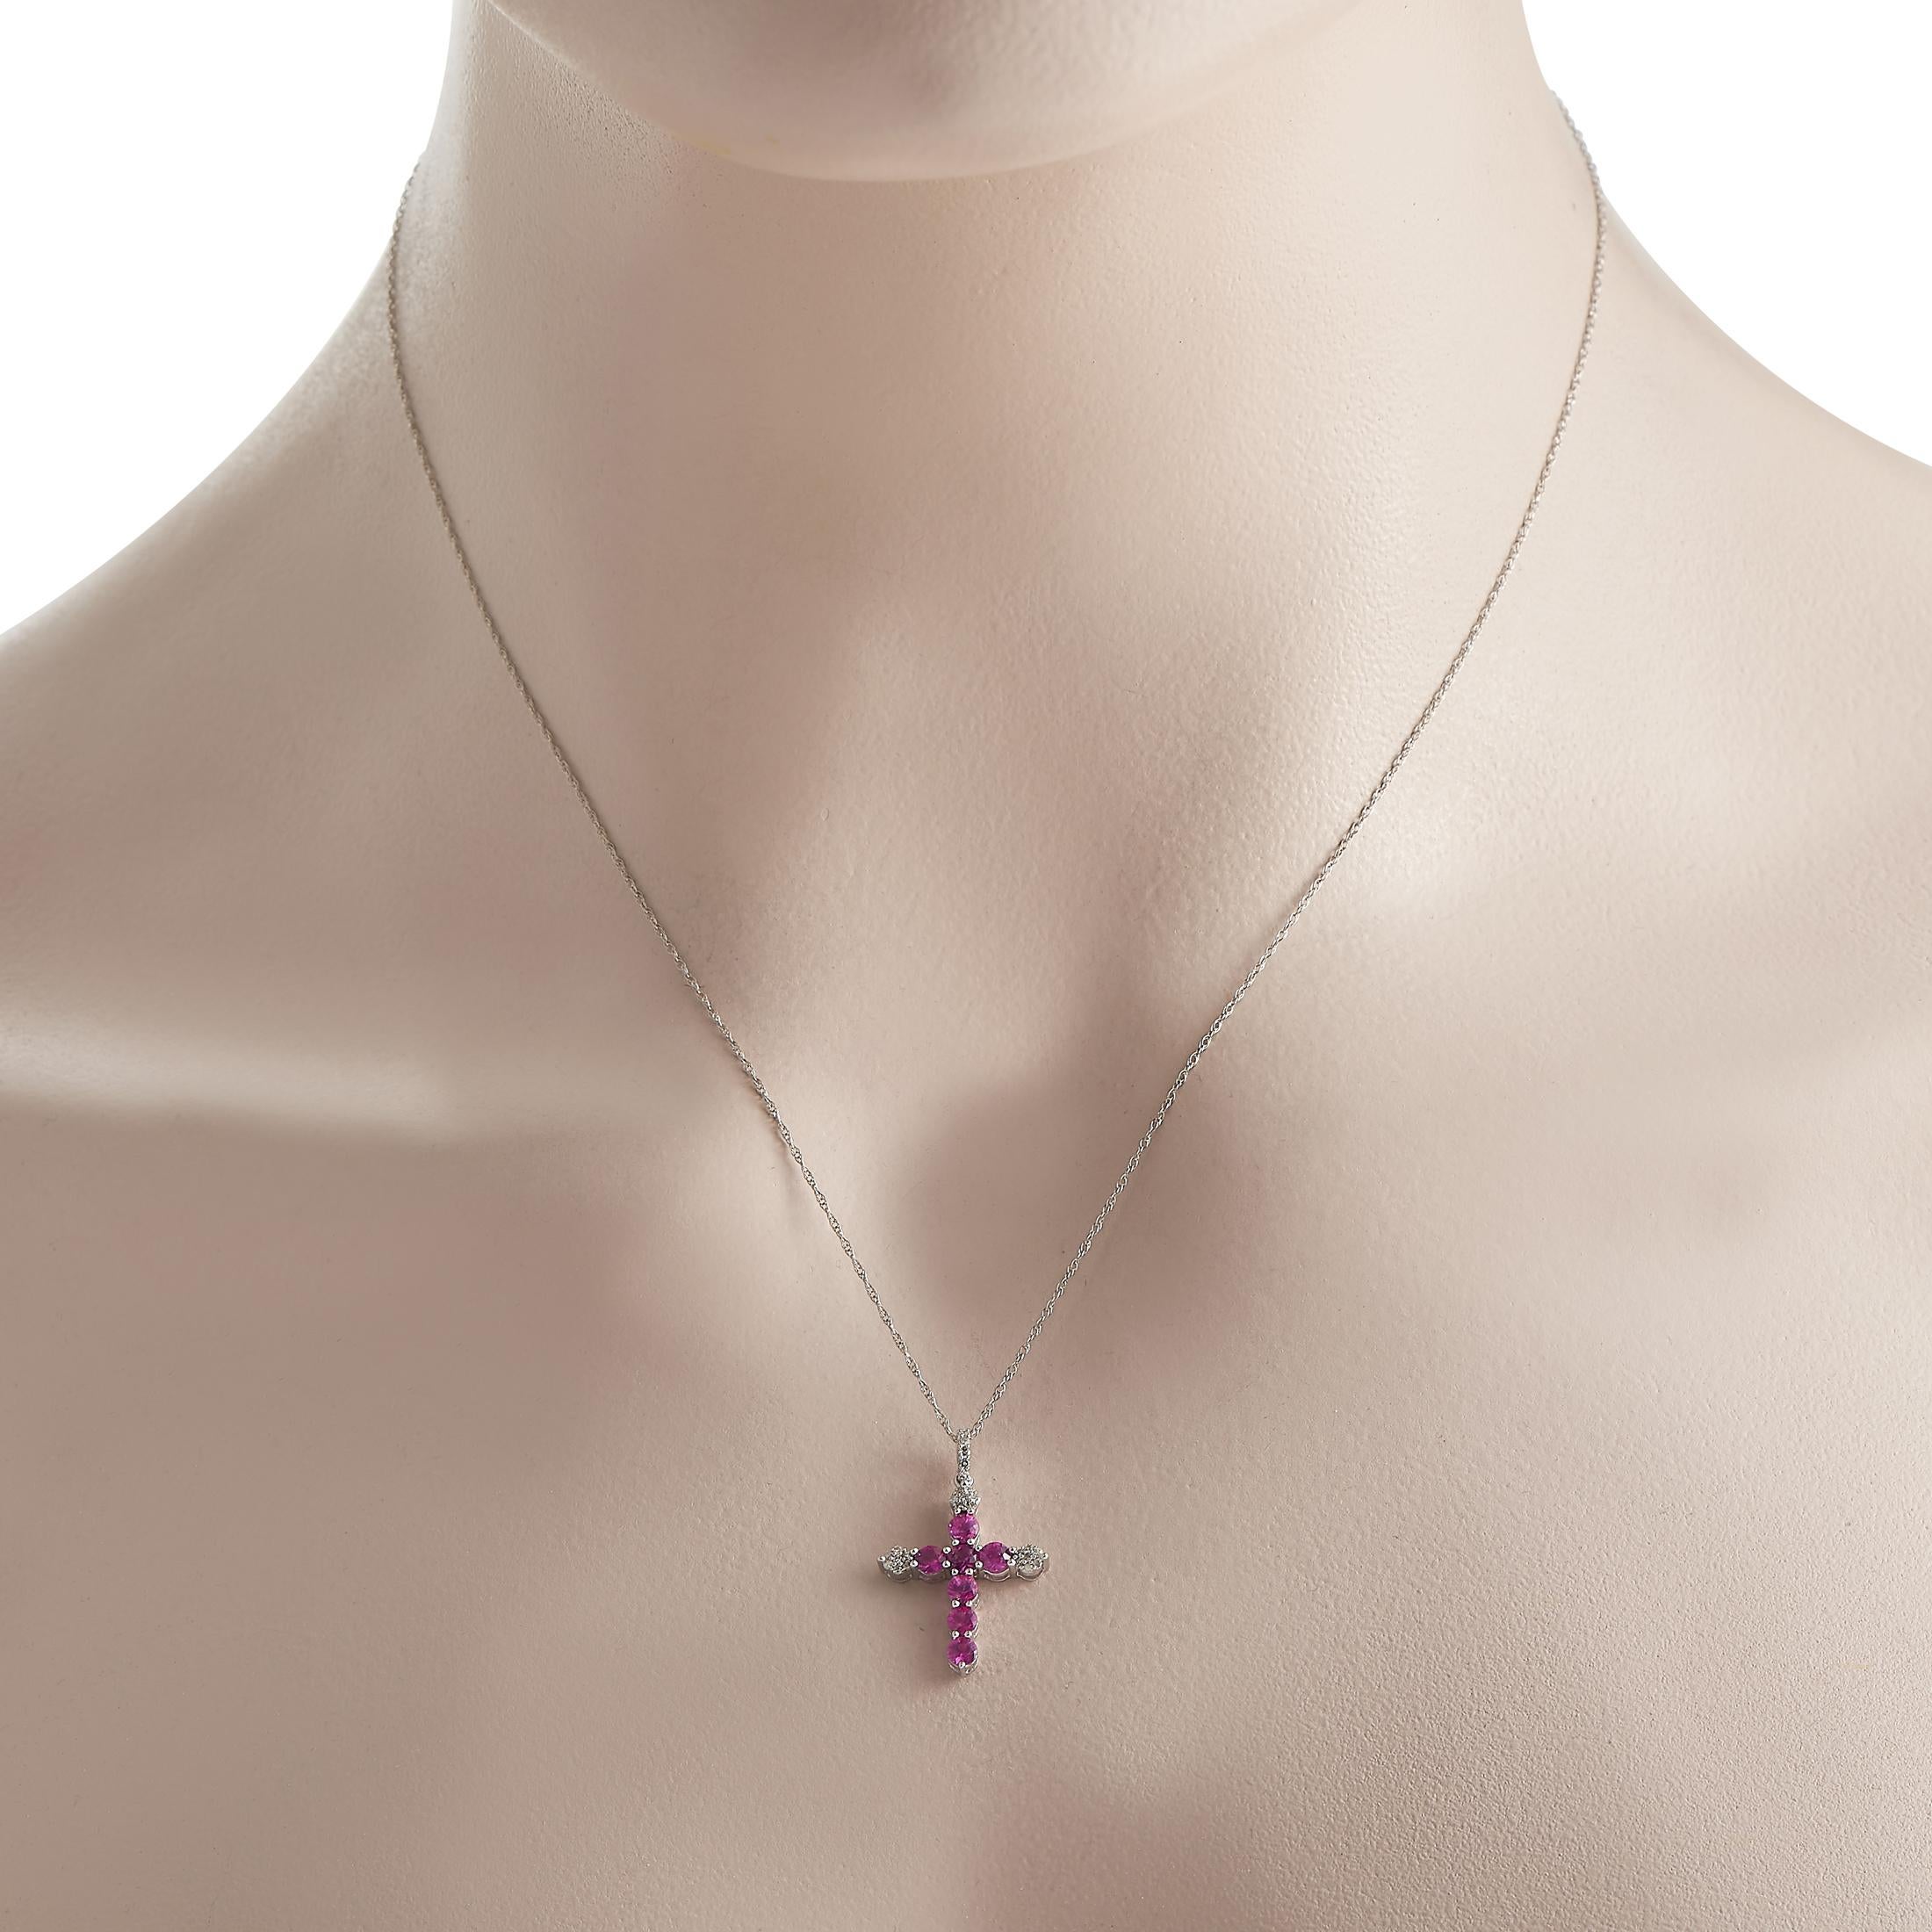 Consider this cross necklace as a beautiful reminder to enrich your spiritual journey. This piece is elegantly crafted in 14K white gold. It bears a cross pendant traced by seven pink sapphires and and clusters of petite round diamonds. The 1 x 0.55